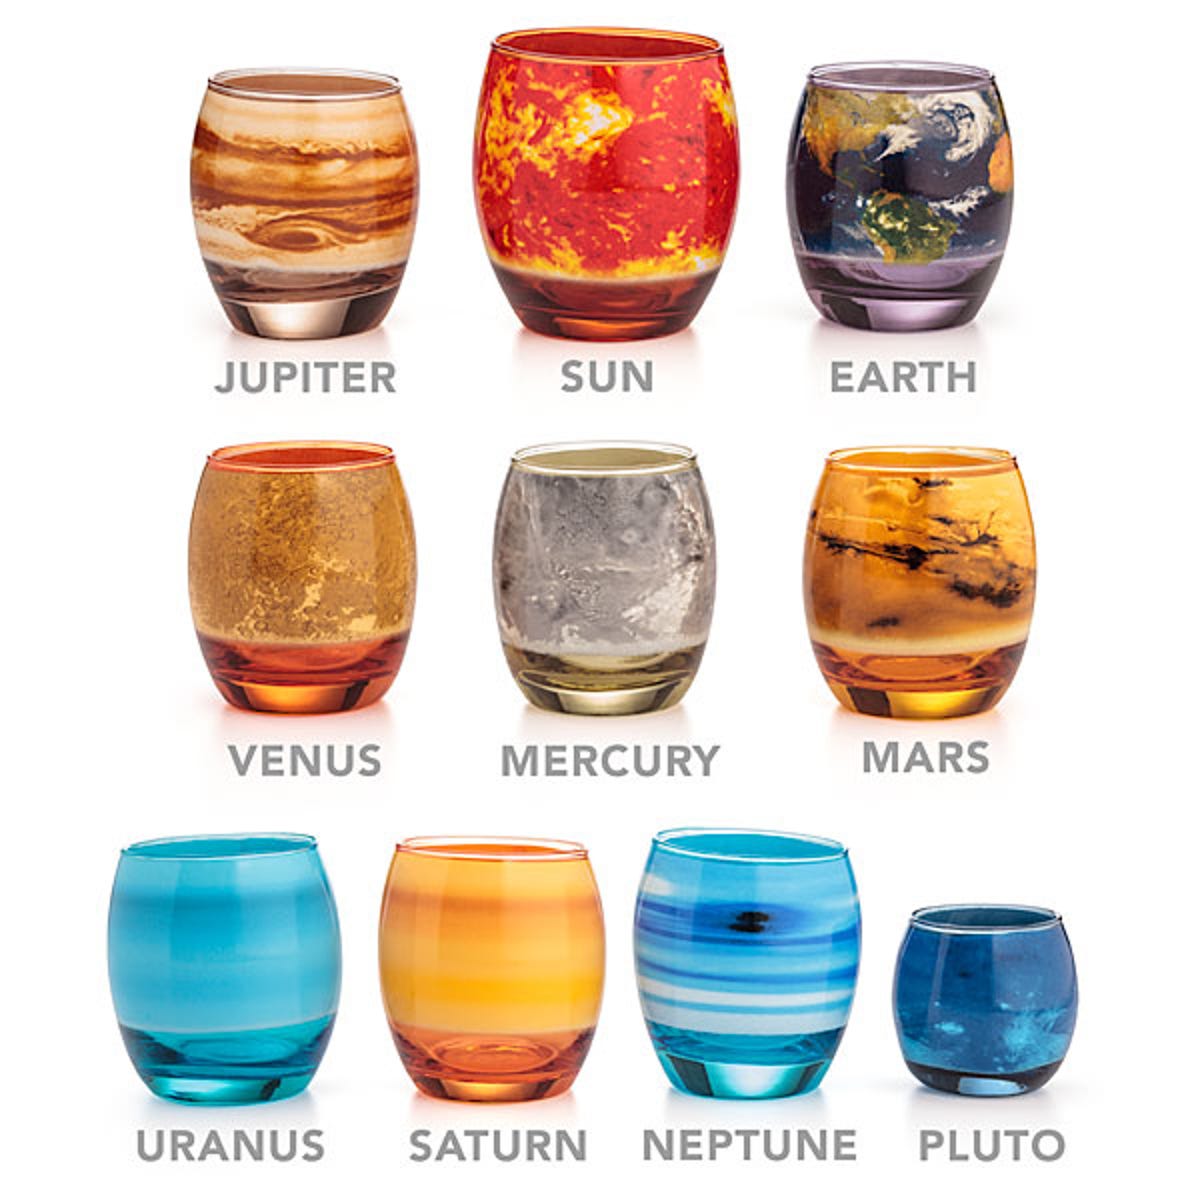 With the ThinkGeek Planetary Glass Set, even Pluto gets a drinking glass. Well sort of.